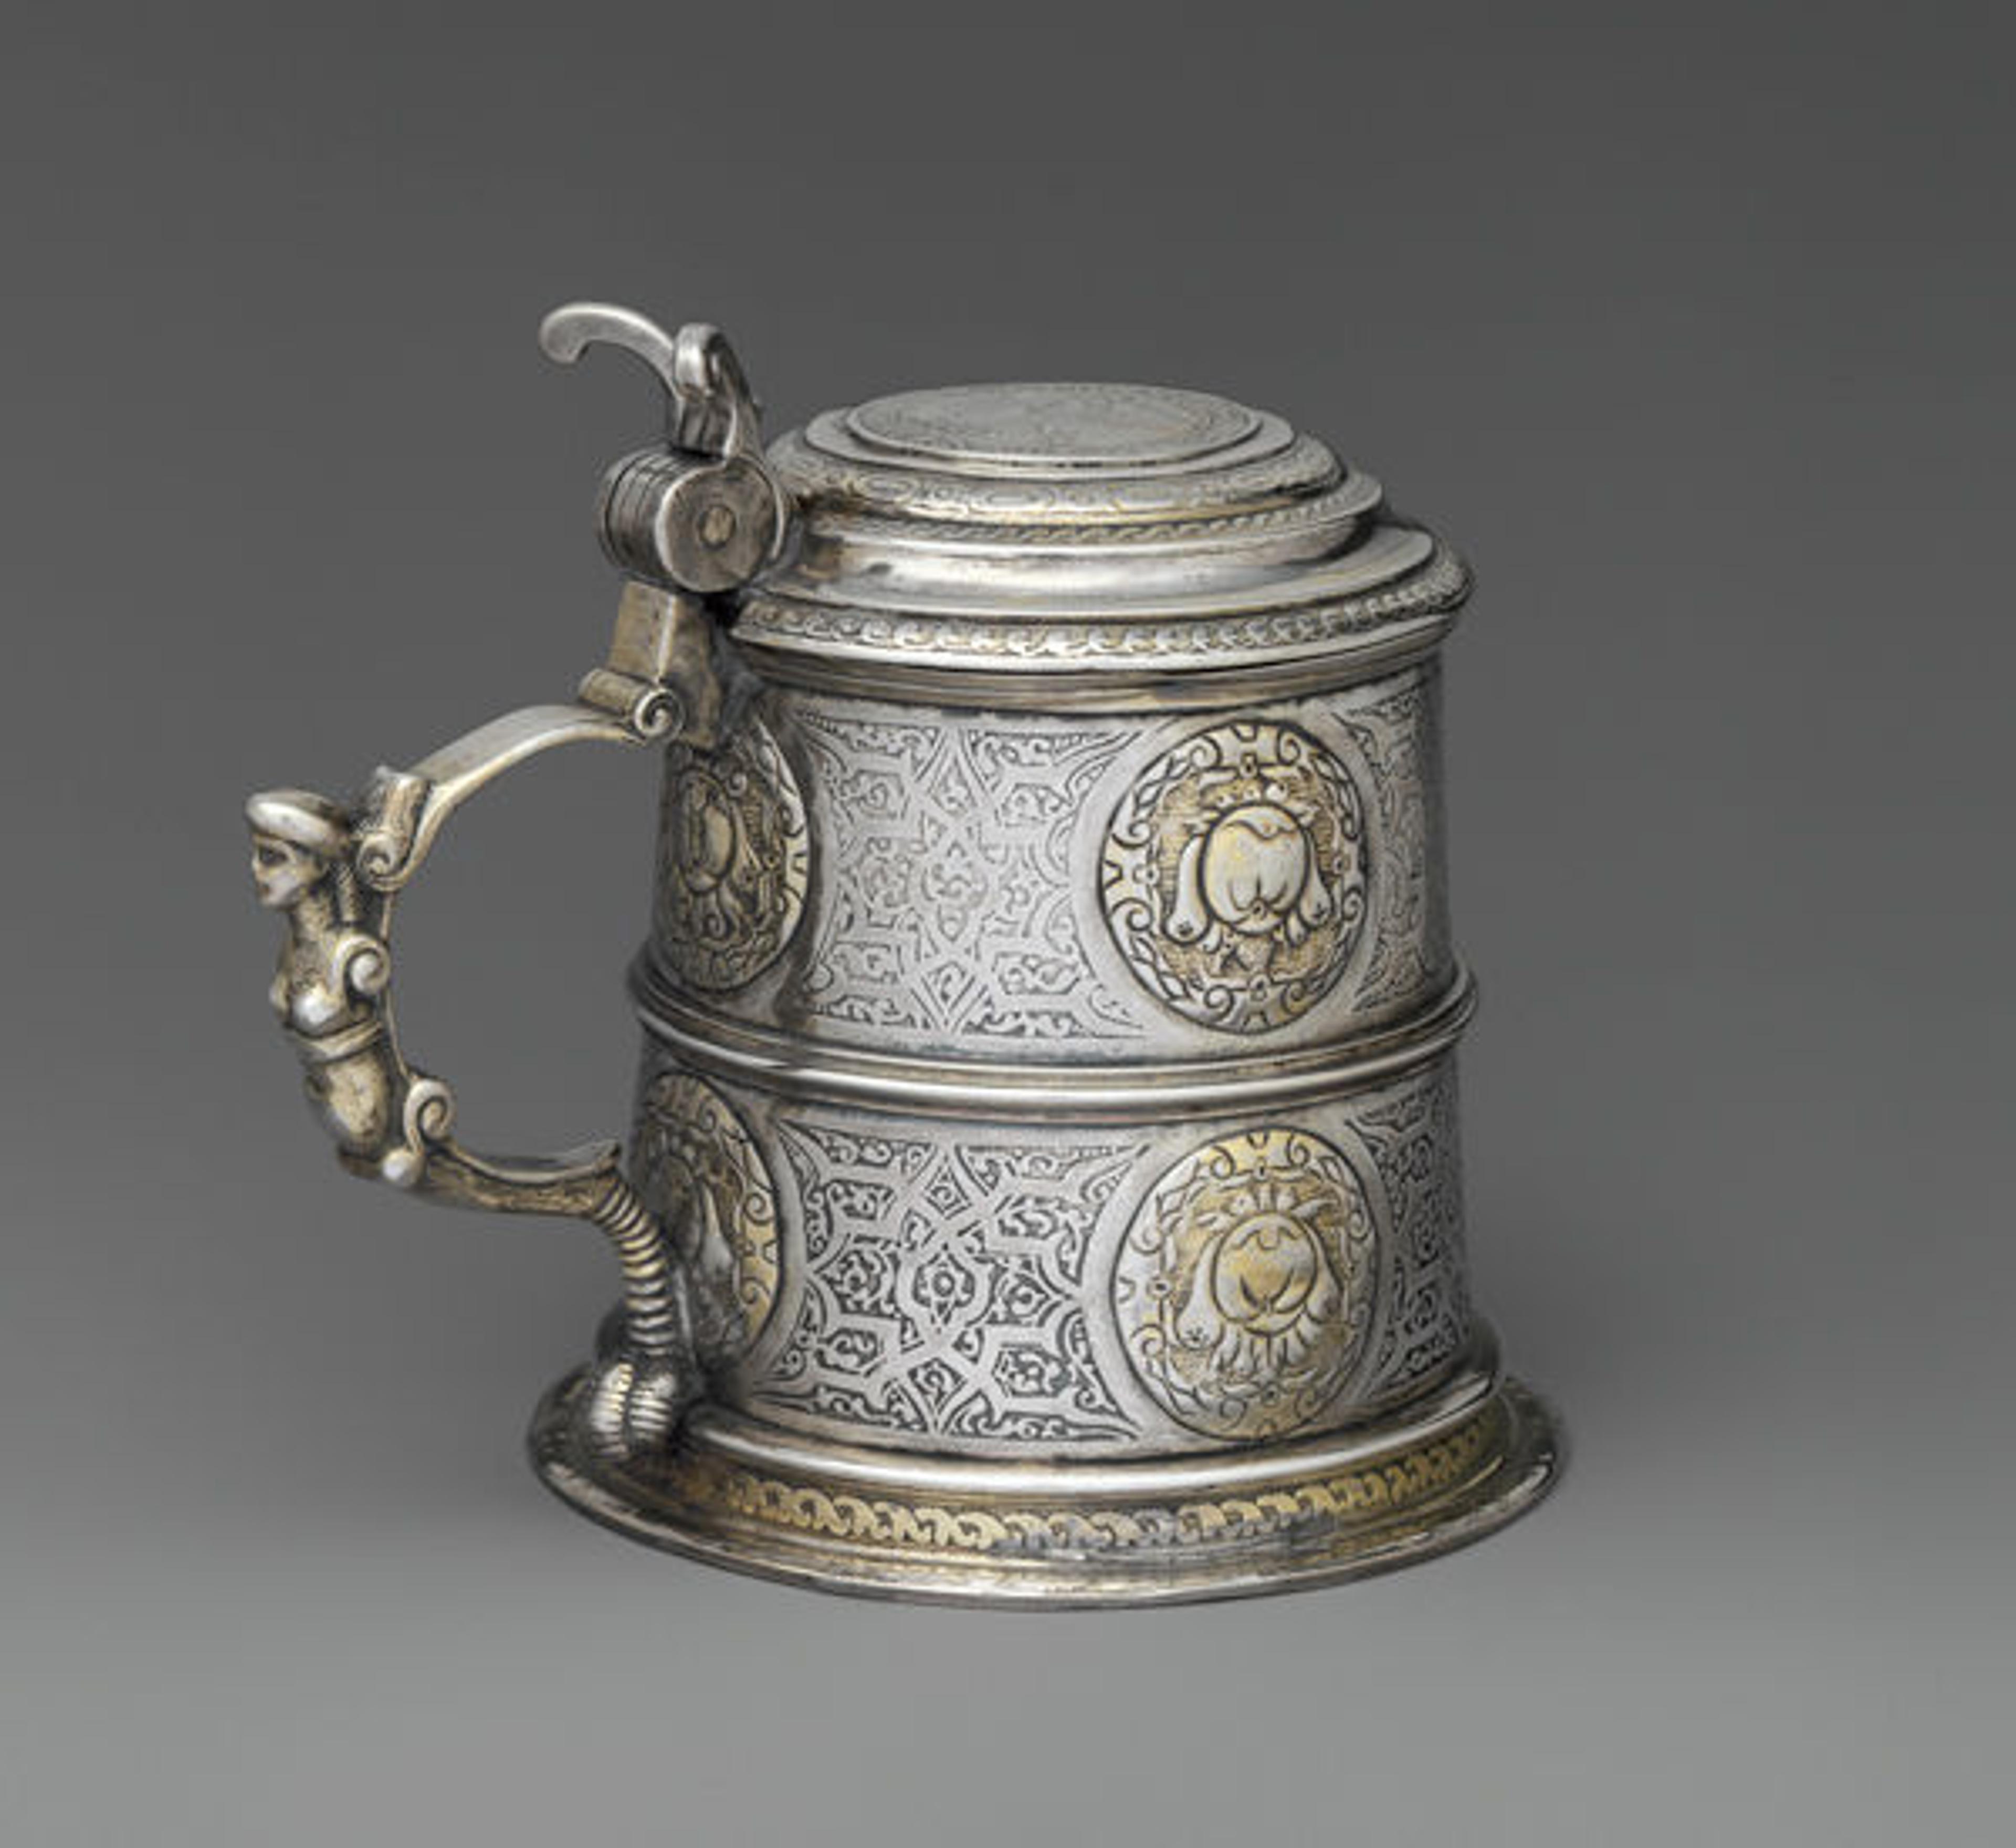 Tankard, late 16th century. Hungarian, possibly Nagyszben. Silver, partly gilded; Height: 5 1/8 in. (13 cm). The Metropolitan Museum of Art, New York, Gift of The Salgo Trust for Education, New York, in memory of Nicolas M. Salgo, 2010 (2010.110.80)